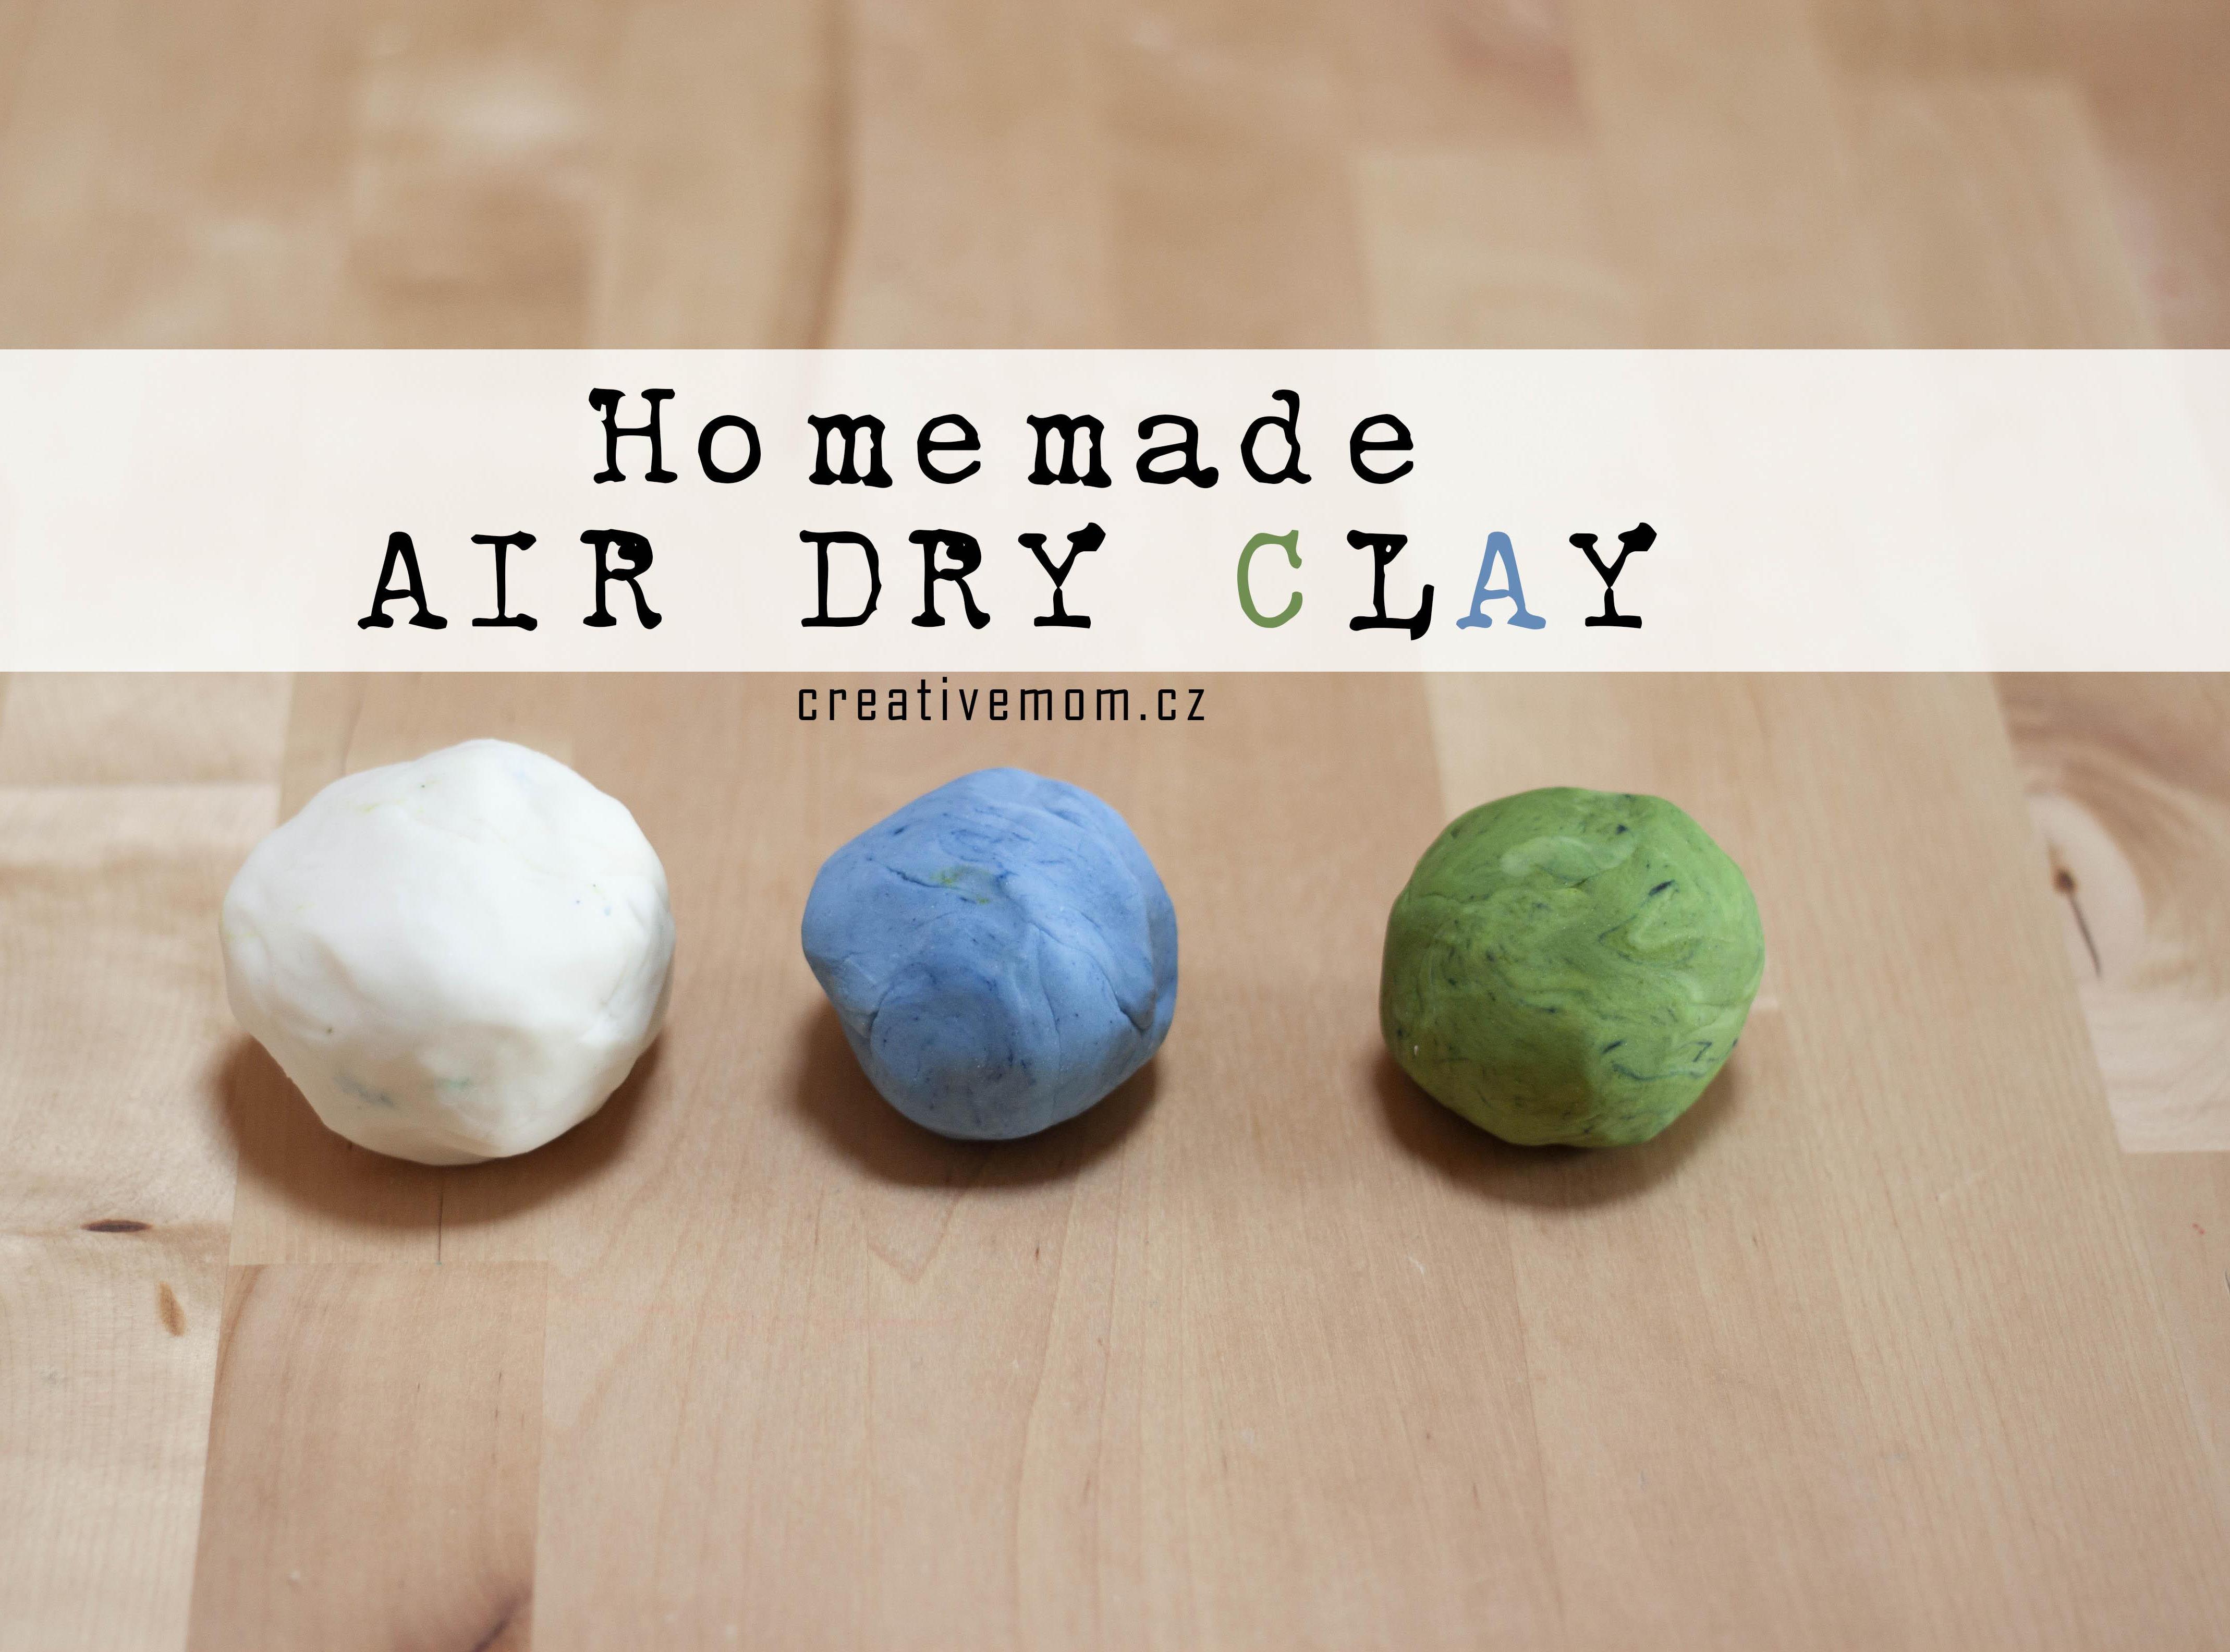 Homemade Air Dry Clay From 3 Ingredients (edible if it comes to it)